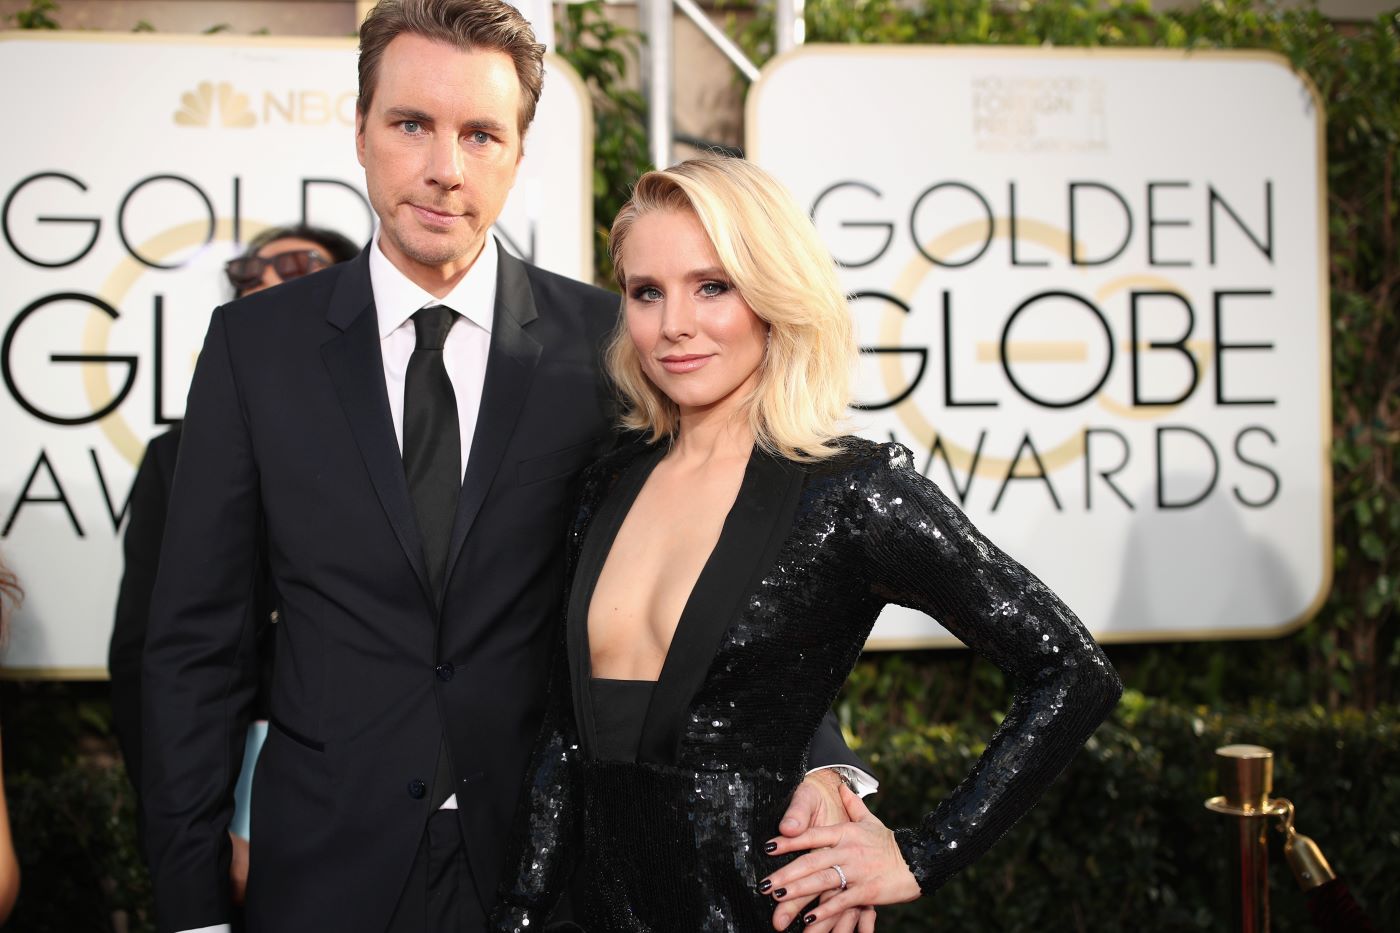 Kristen Bell and Dax Shepard Used to Fight All the Time and It was ‘Dramatic’